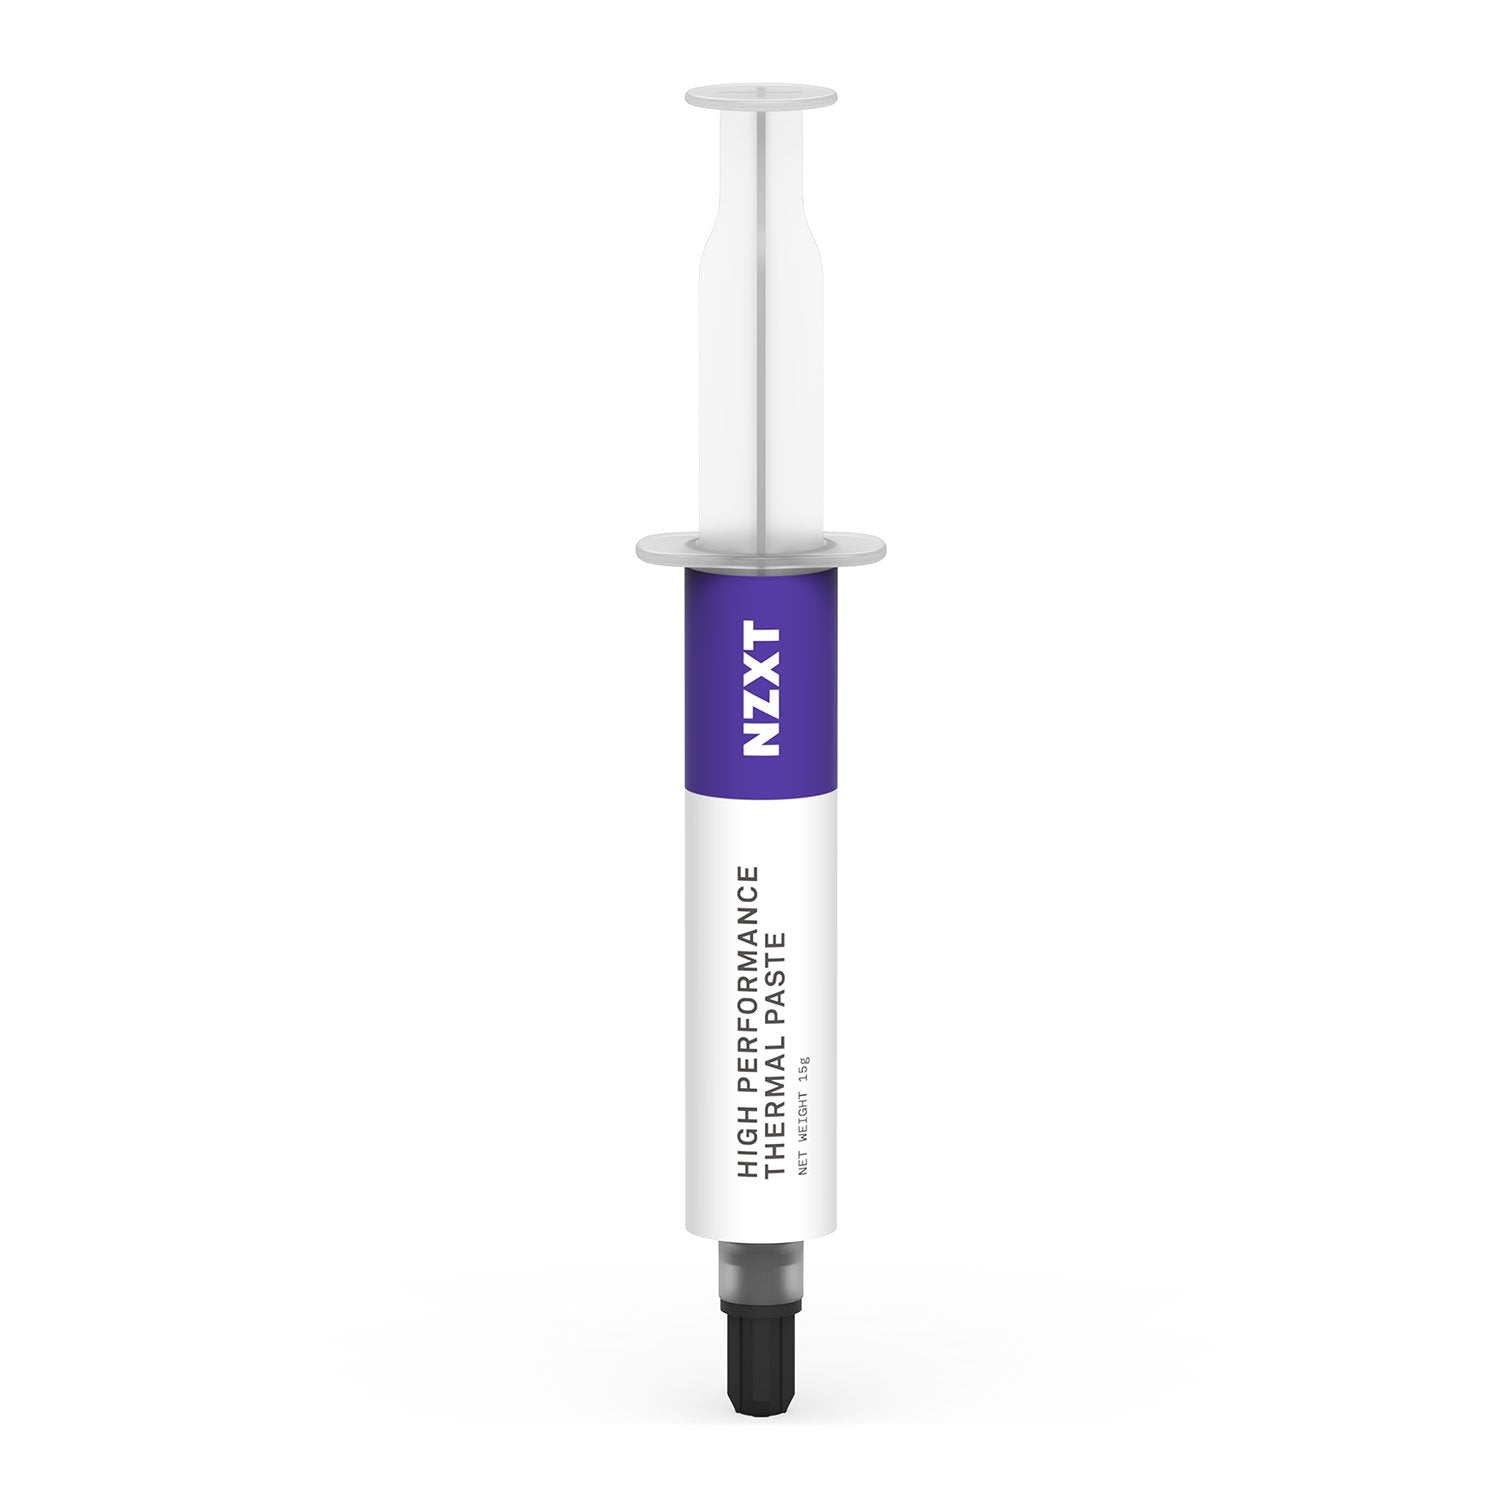 NZXT 15g High-Performance Thermal Paste